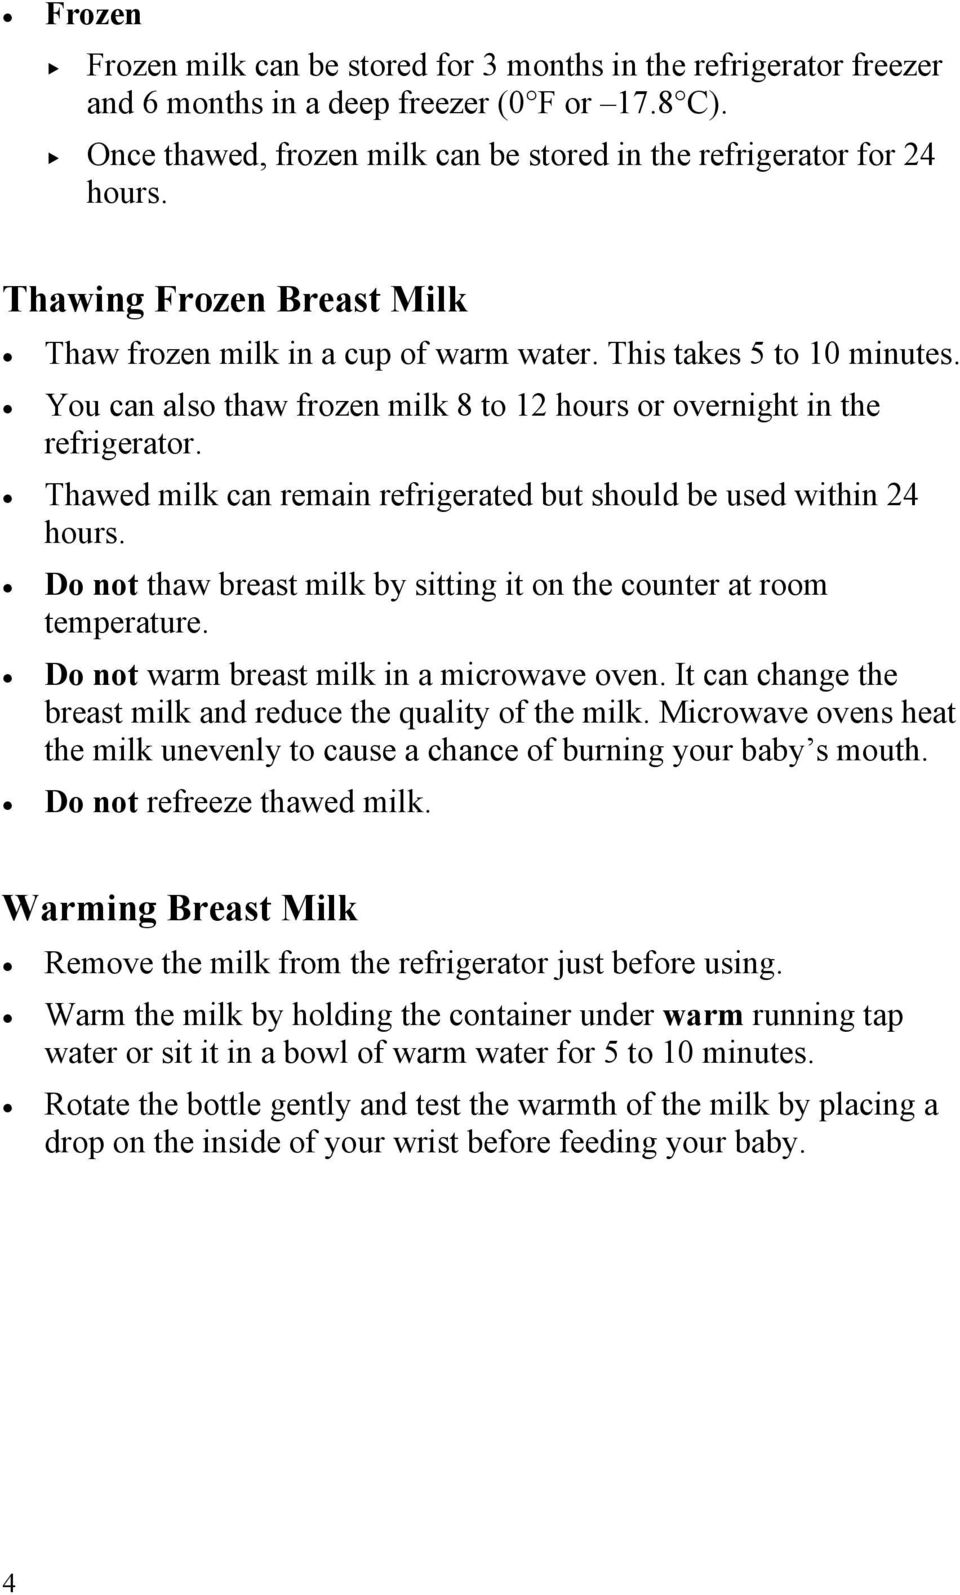 Thawed milk can remain refrigerated but should be used within 24 hours. Do not thaw breast milk by sitting it on the counter at room temperature. Do not warm breast milk in a microwave oven.